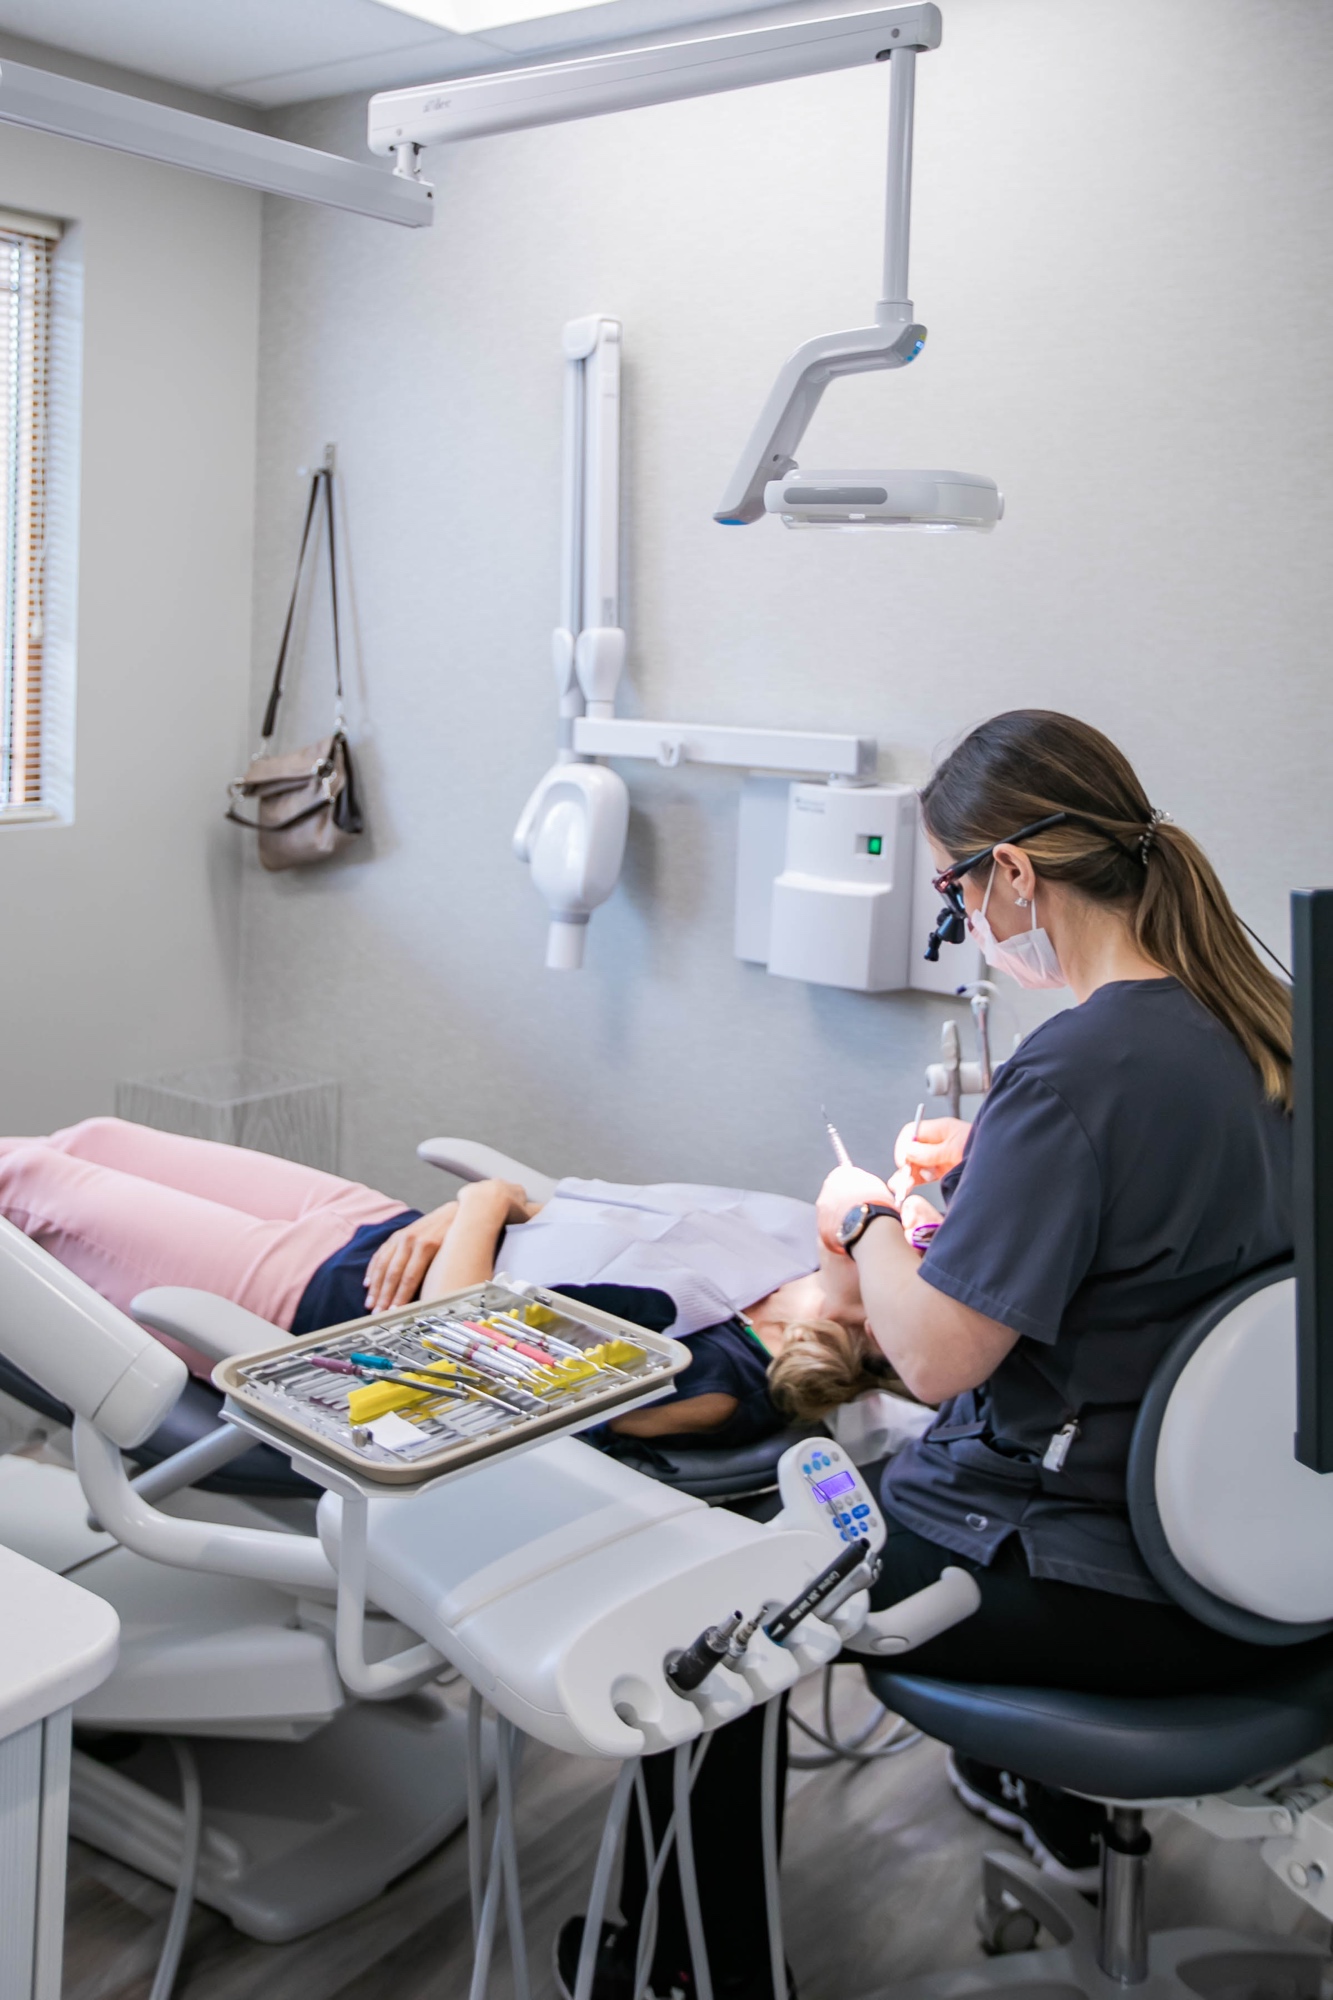 Dental cleaning procedure in Rosemary Heights Family Dental Centre in Surrey